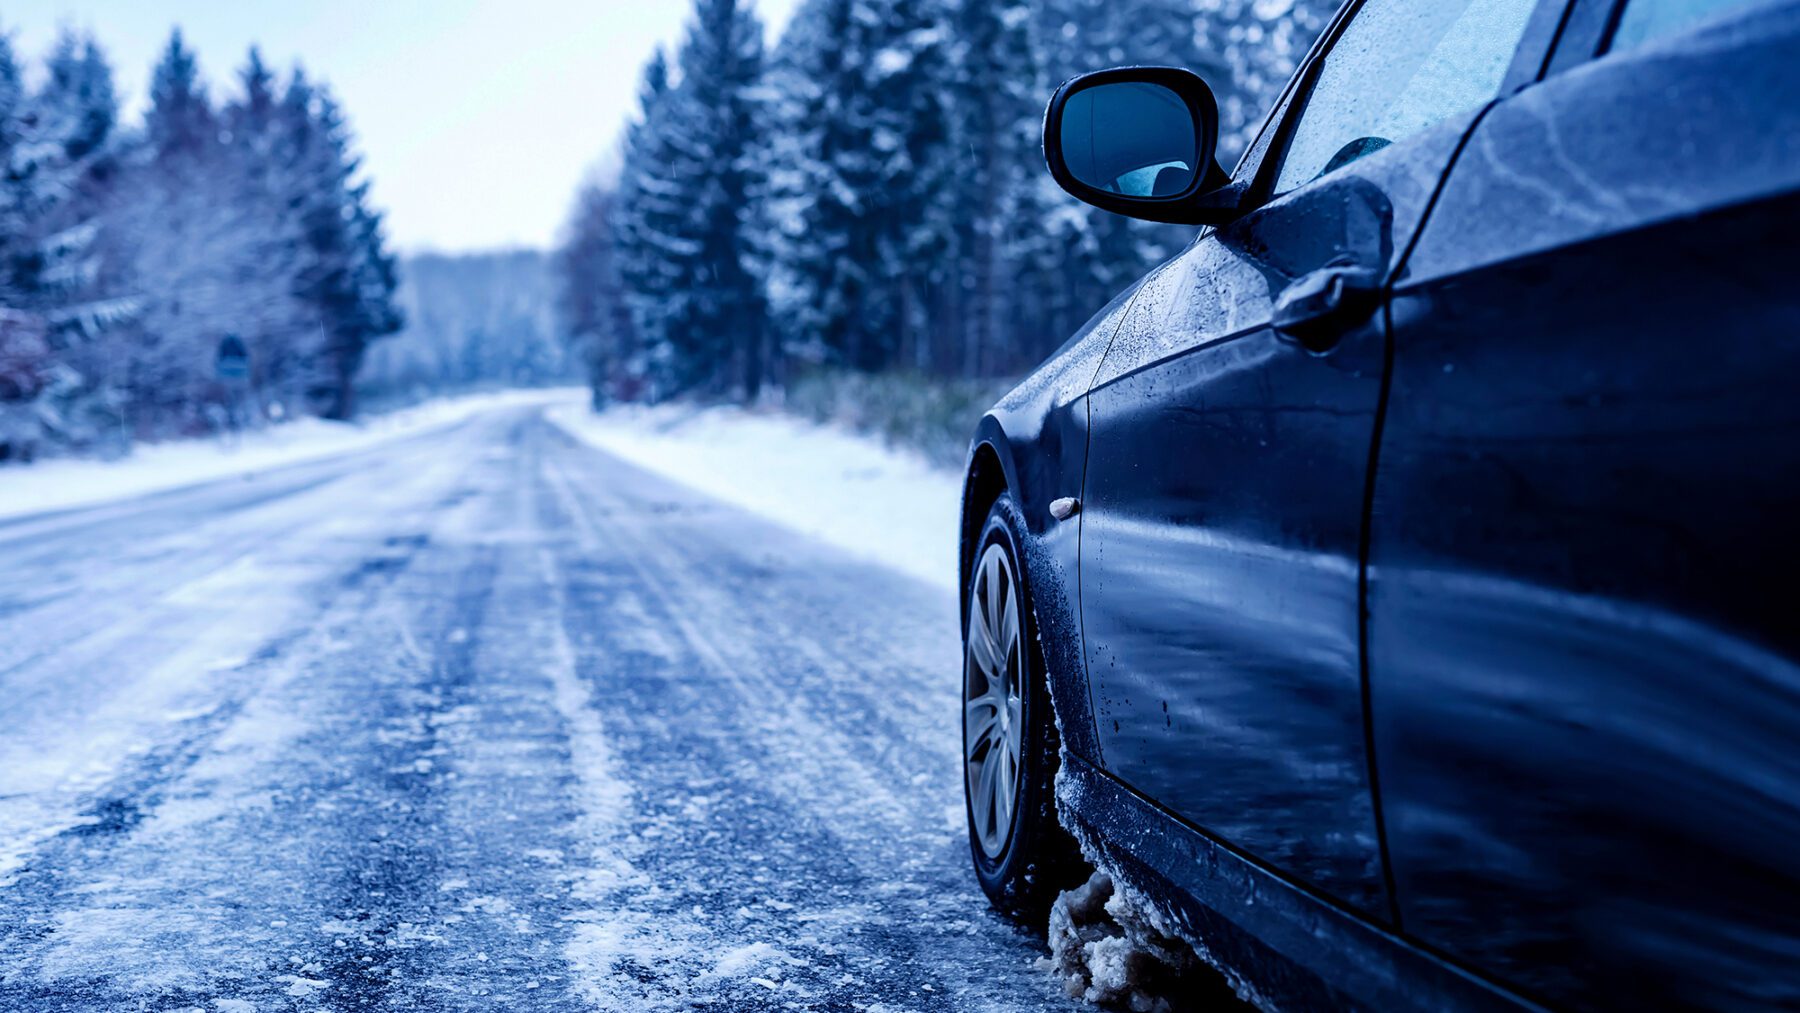 Prepare your vehicle for winter